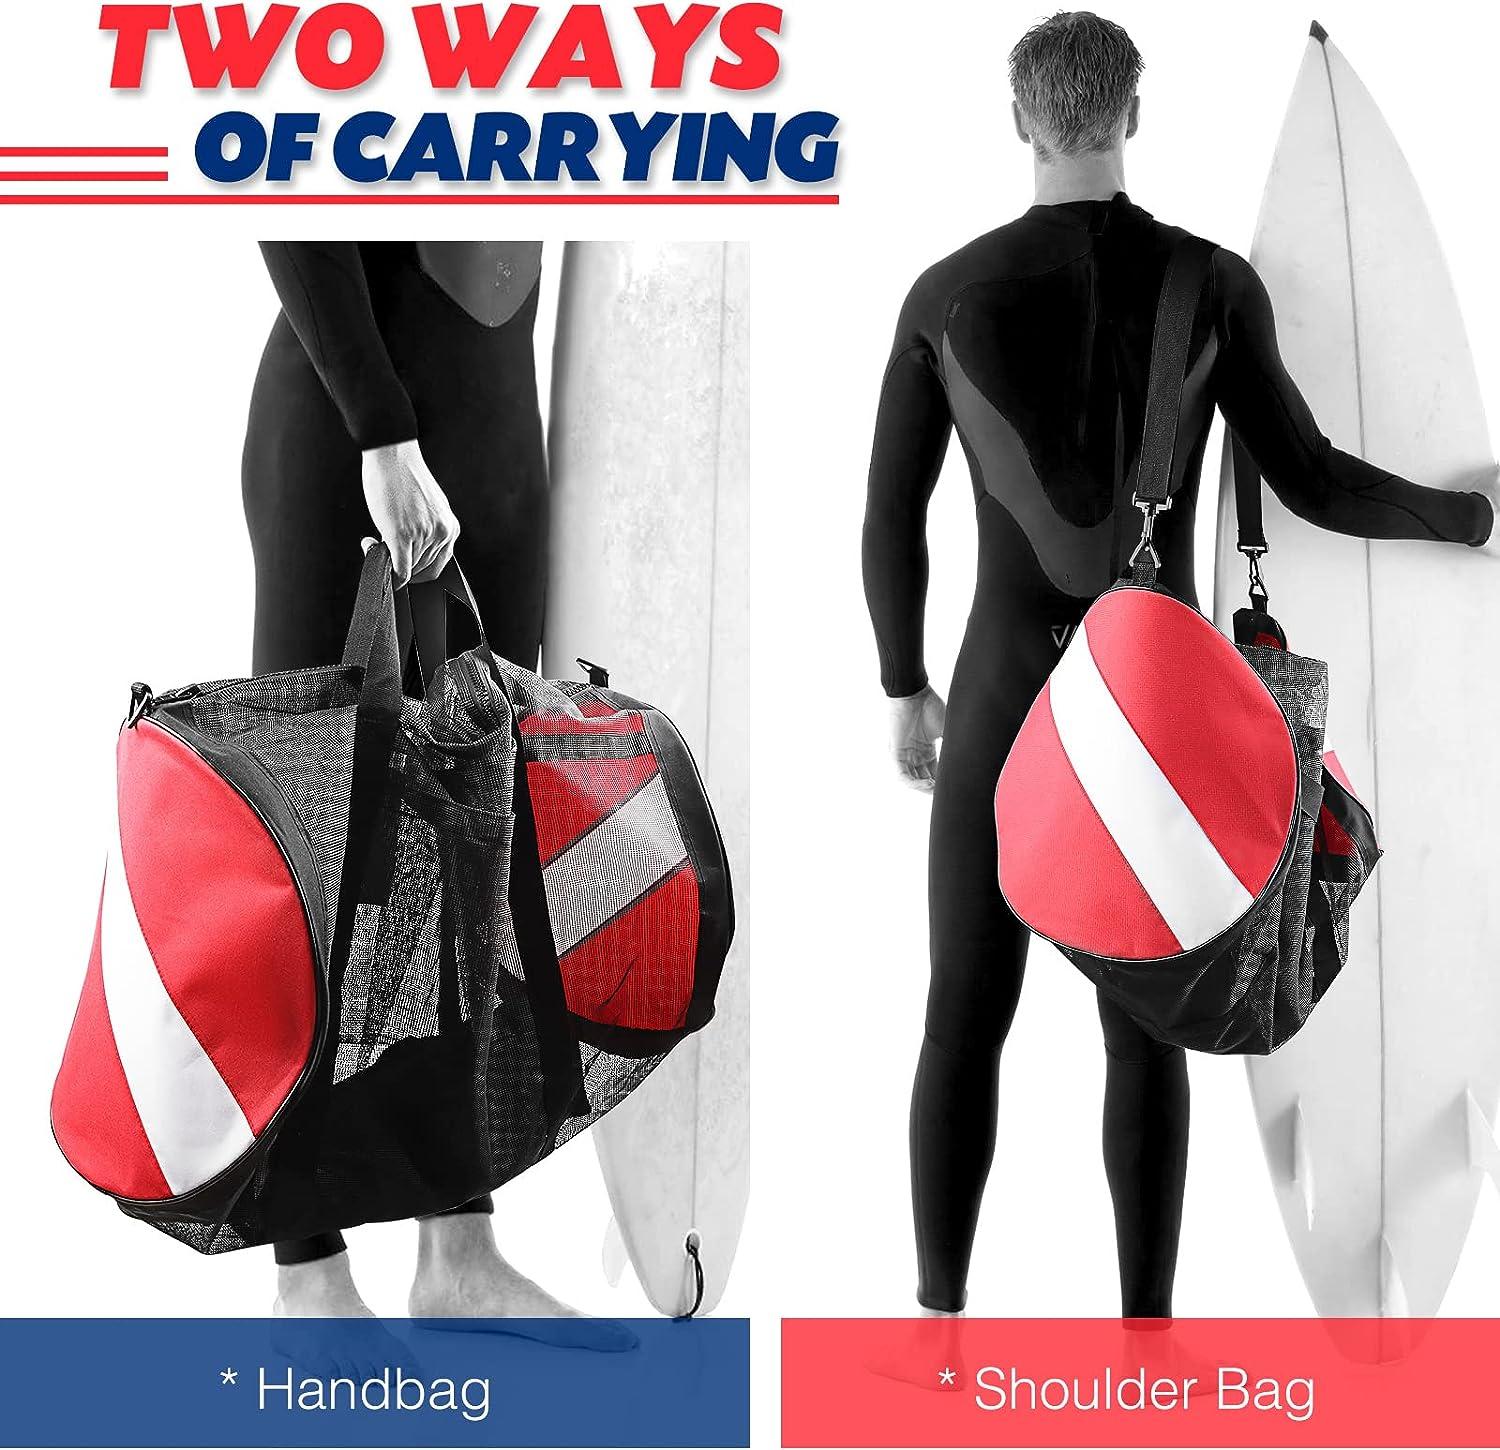 OVOVFANY Mesh Dive Bag, Heavy-Duty Oversized Dive Flag Mesh Duffel Bags  Travel Dry Totes with Shoulder Straps and Pocket Storage Water Sports &  Beach Gears for Diving, Spearfishing, Swimming,Gym